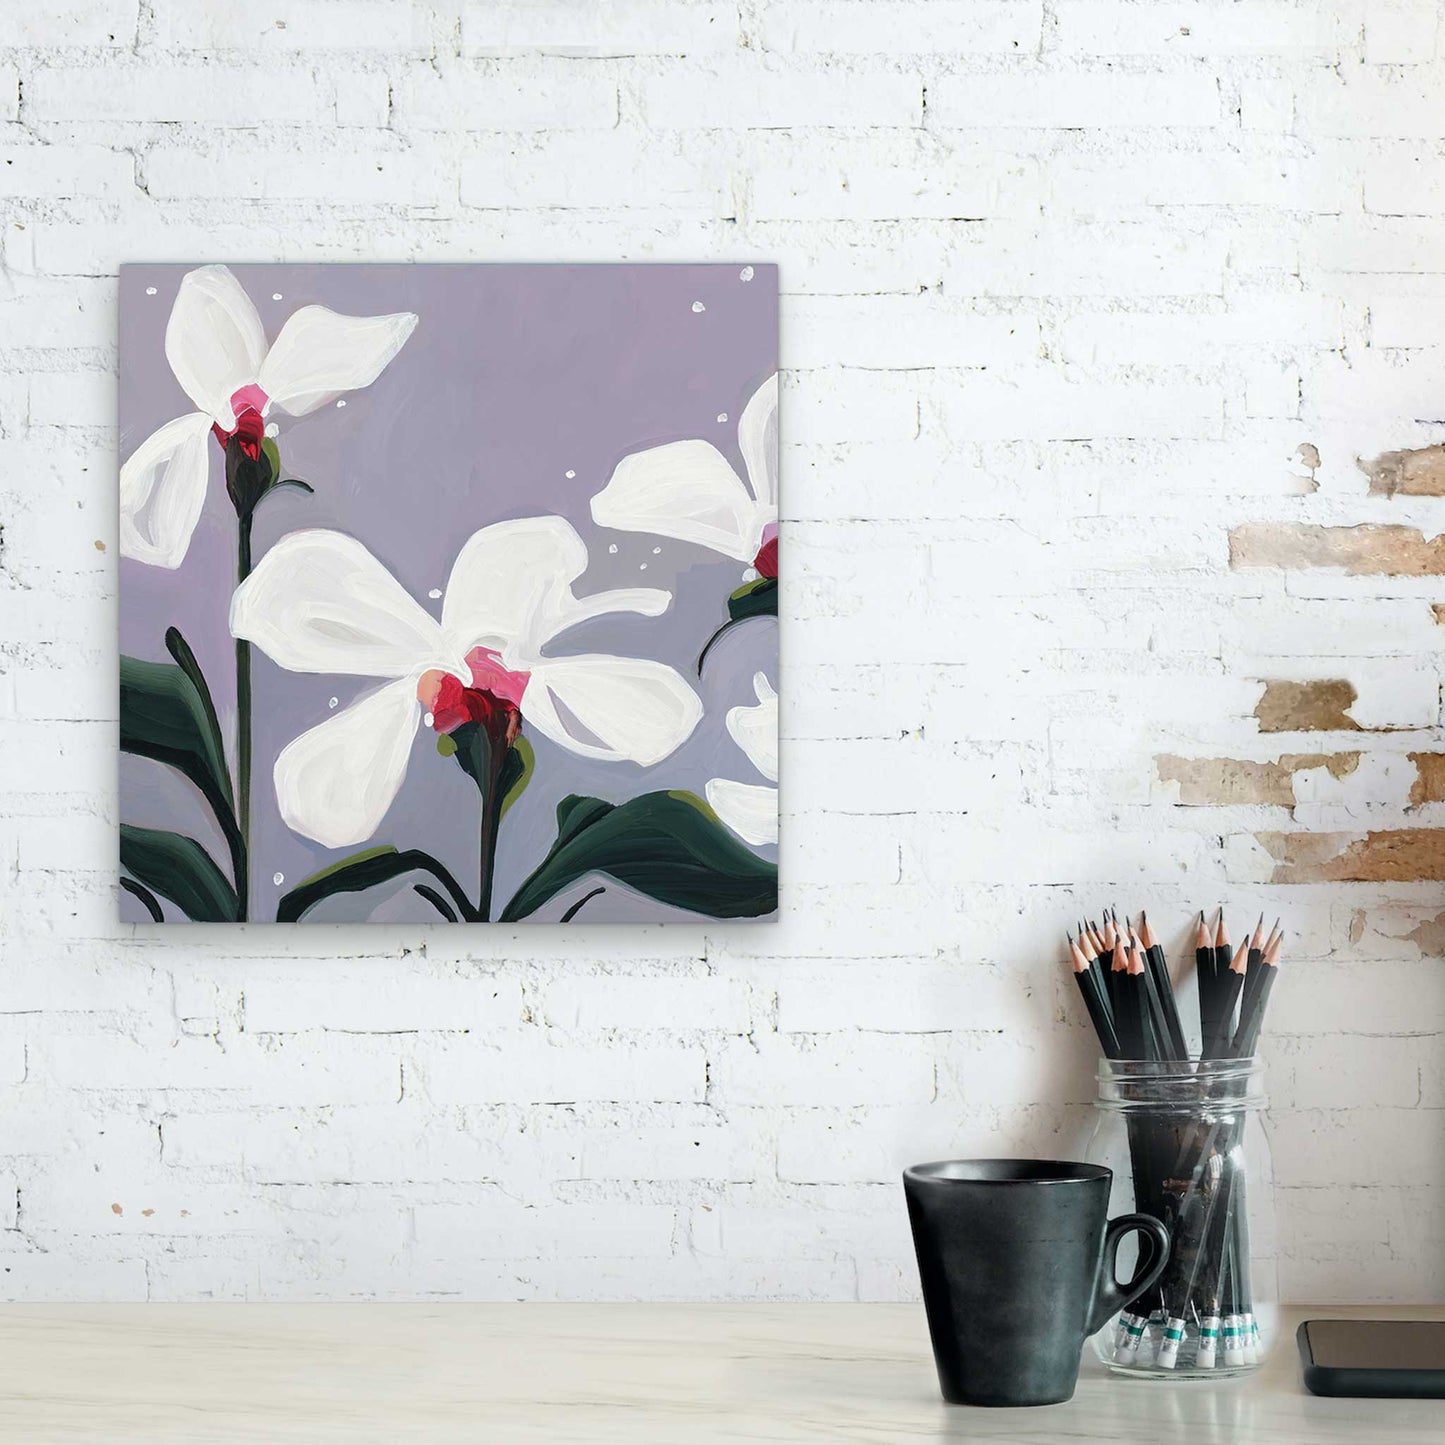 Acrylic flower painting canvas floral art abstract flower painting by Canadian artist Susannah Bleasby